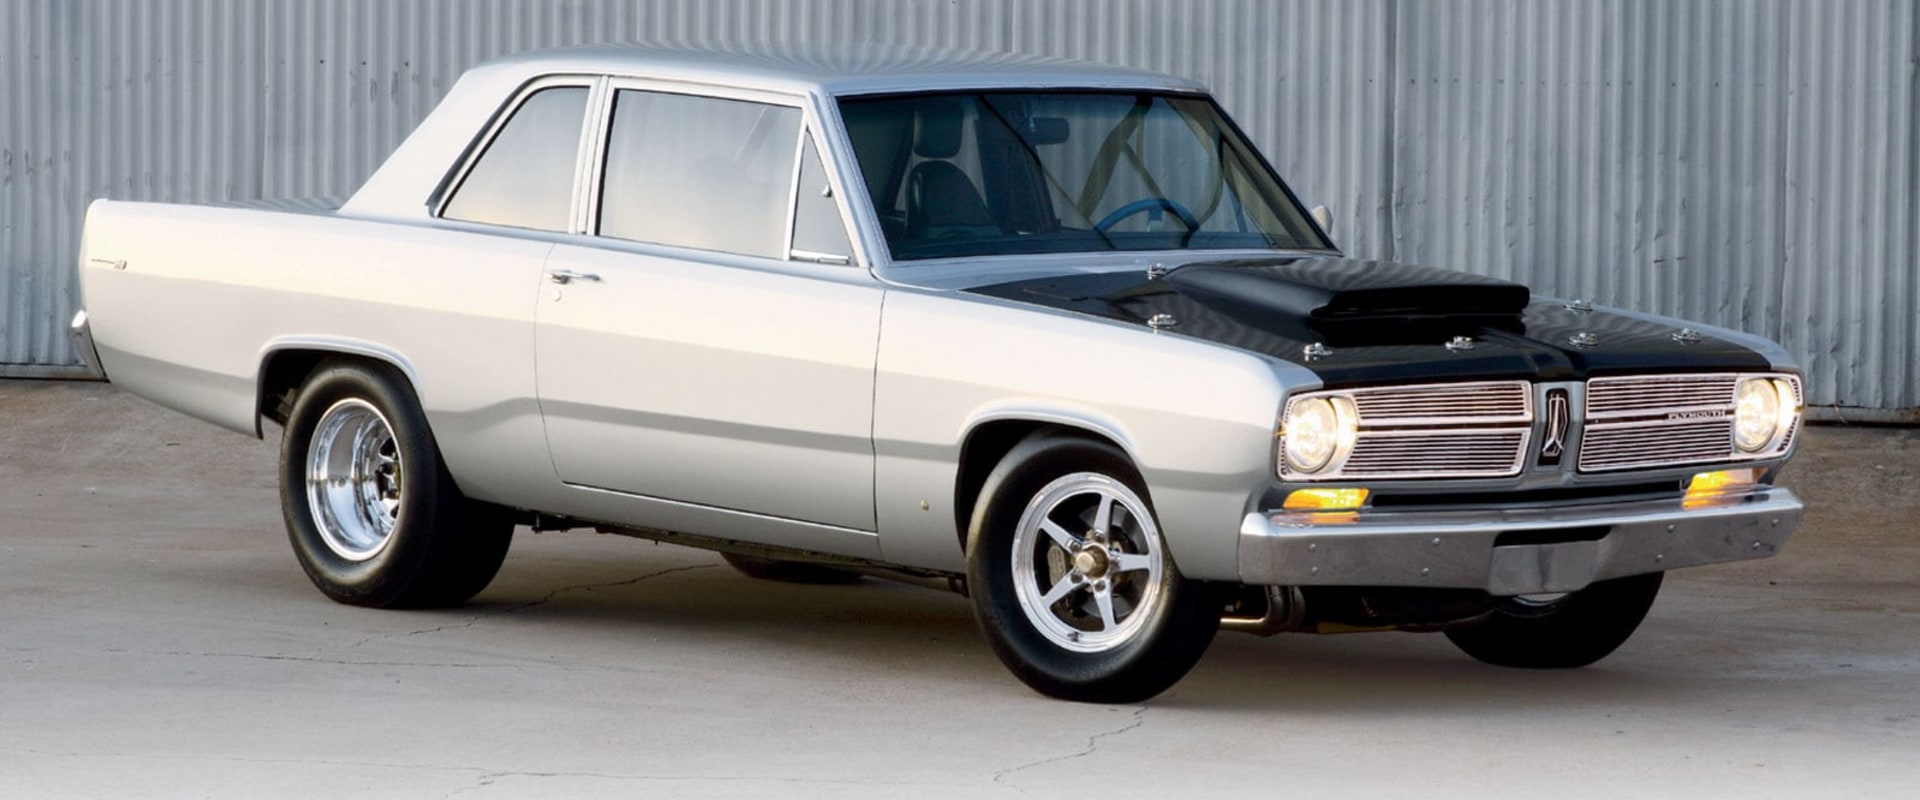 Plymouth Valiant: An Overview of a Classic Mopar Performance Car